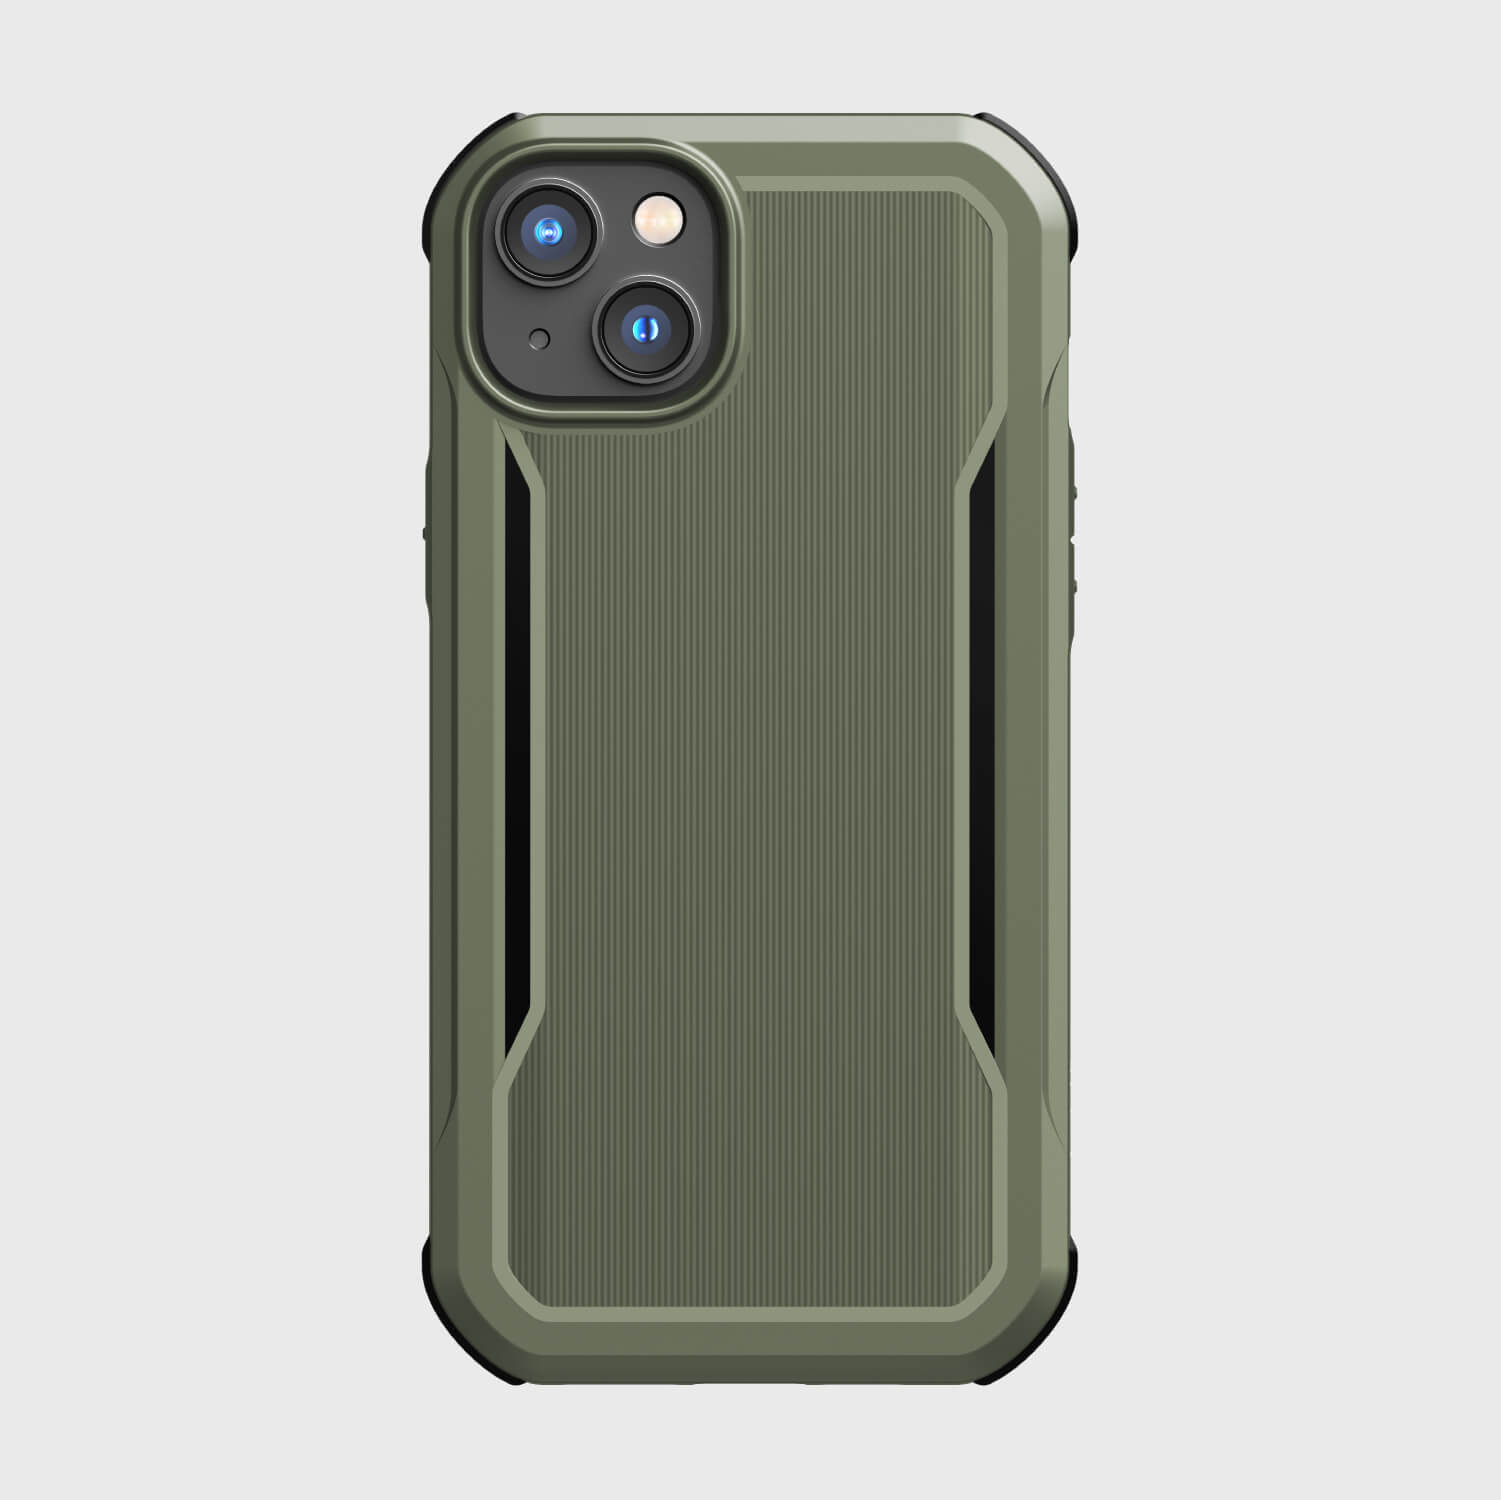 The olive green biodegradable iPhone 14 Plus Case - Fort Built for MagSafe, featuring MagSafe technology and military-grade drop protection by Raptic.